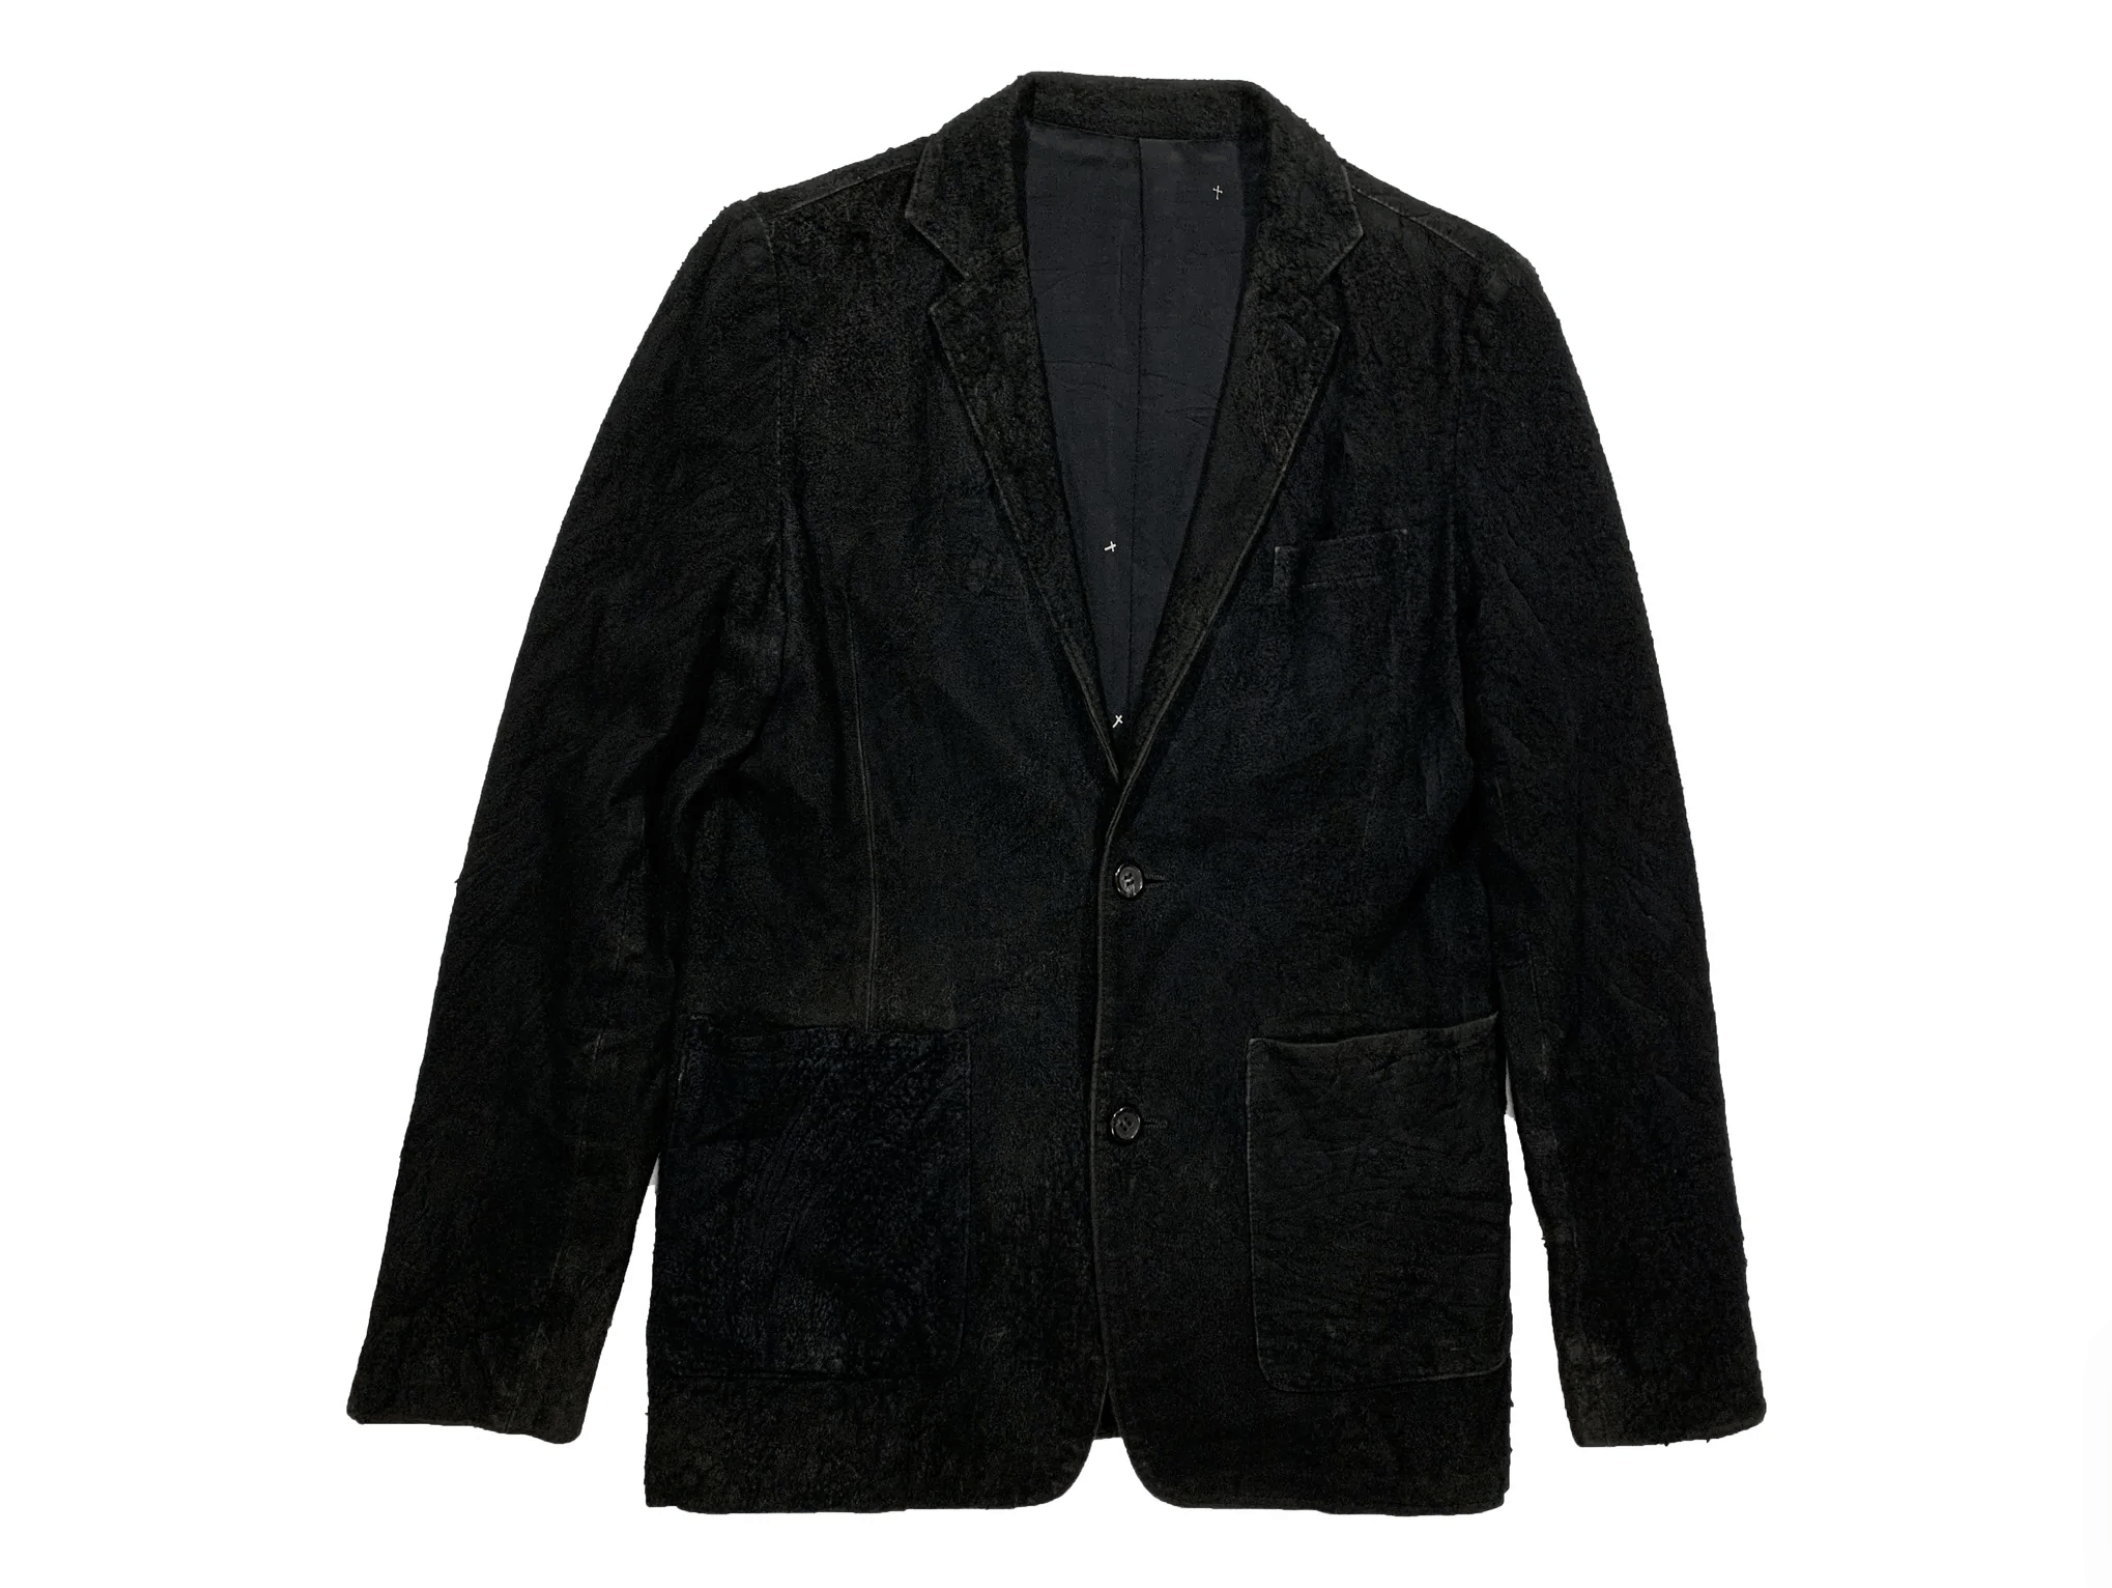 Undercover AW02 “Witches Cell Division” Hand Painted Lambskin Blazer ...